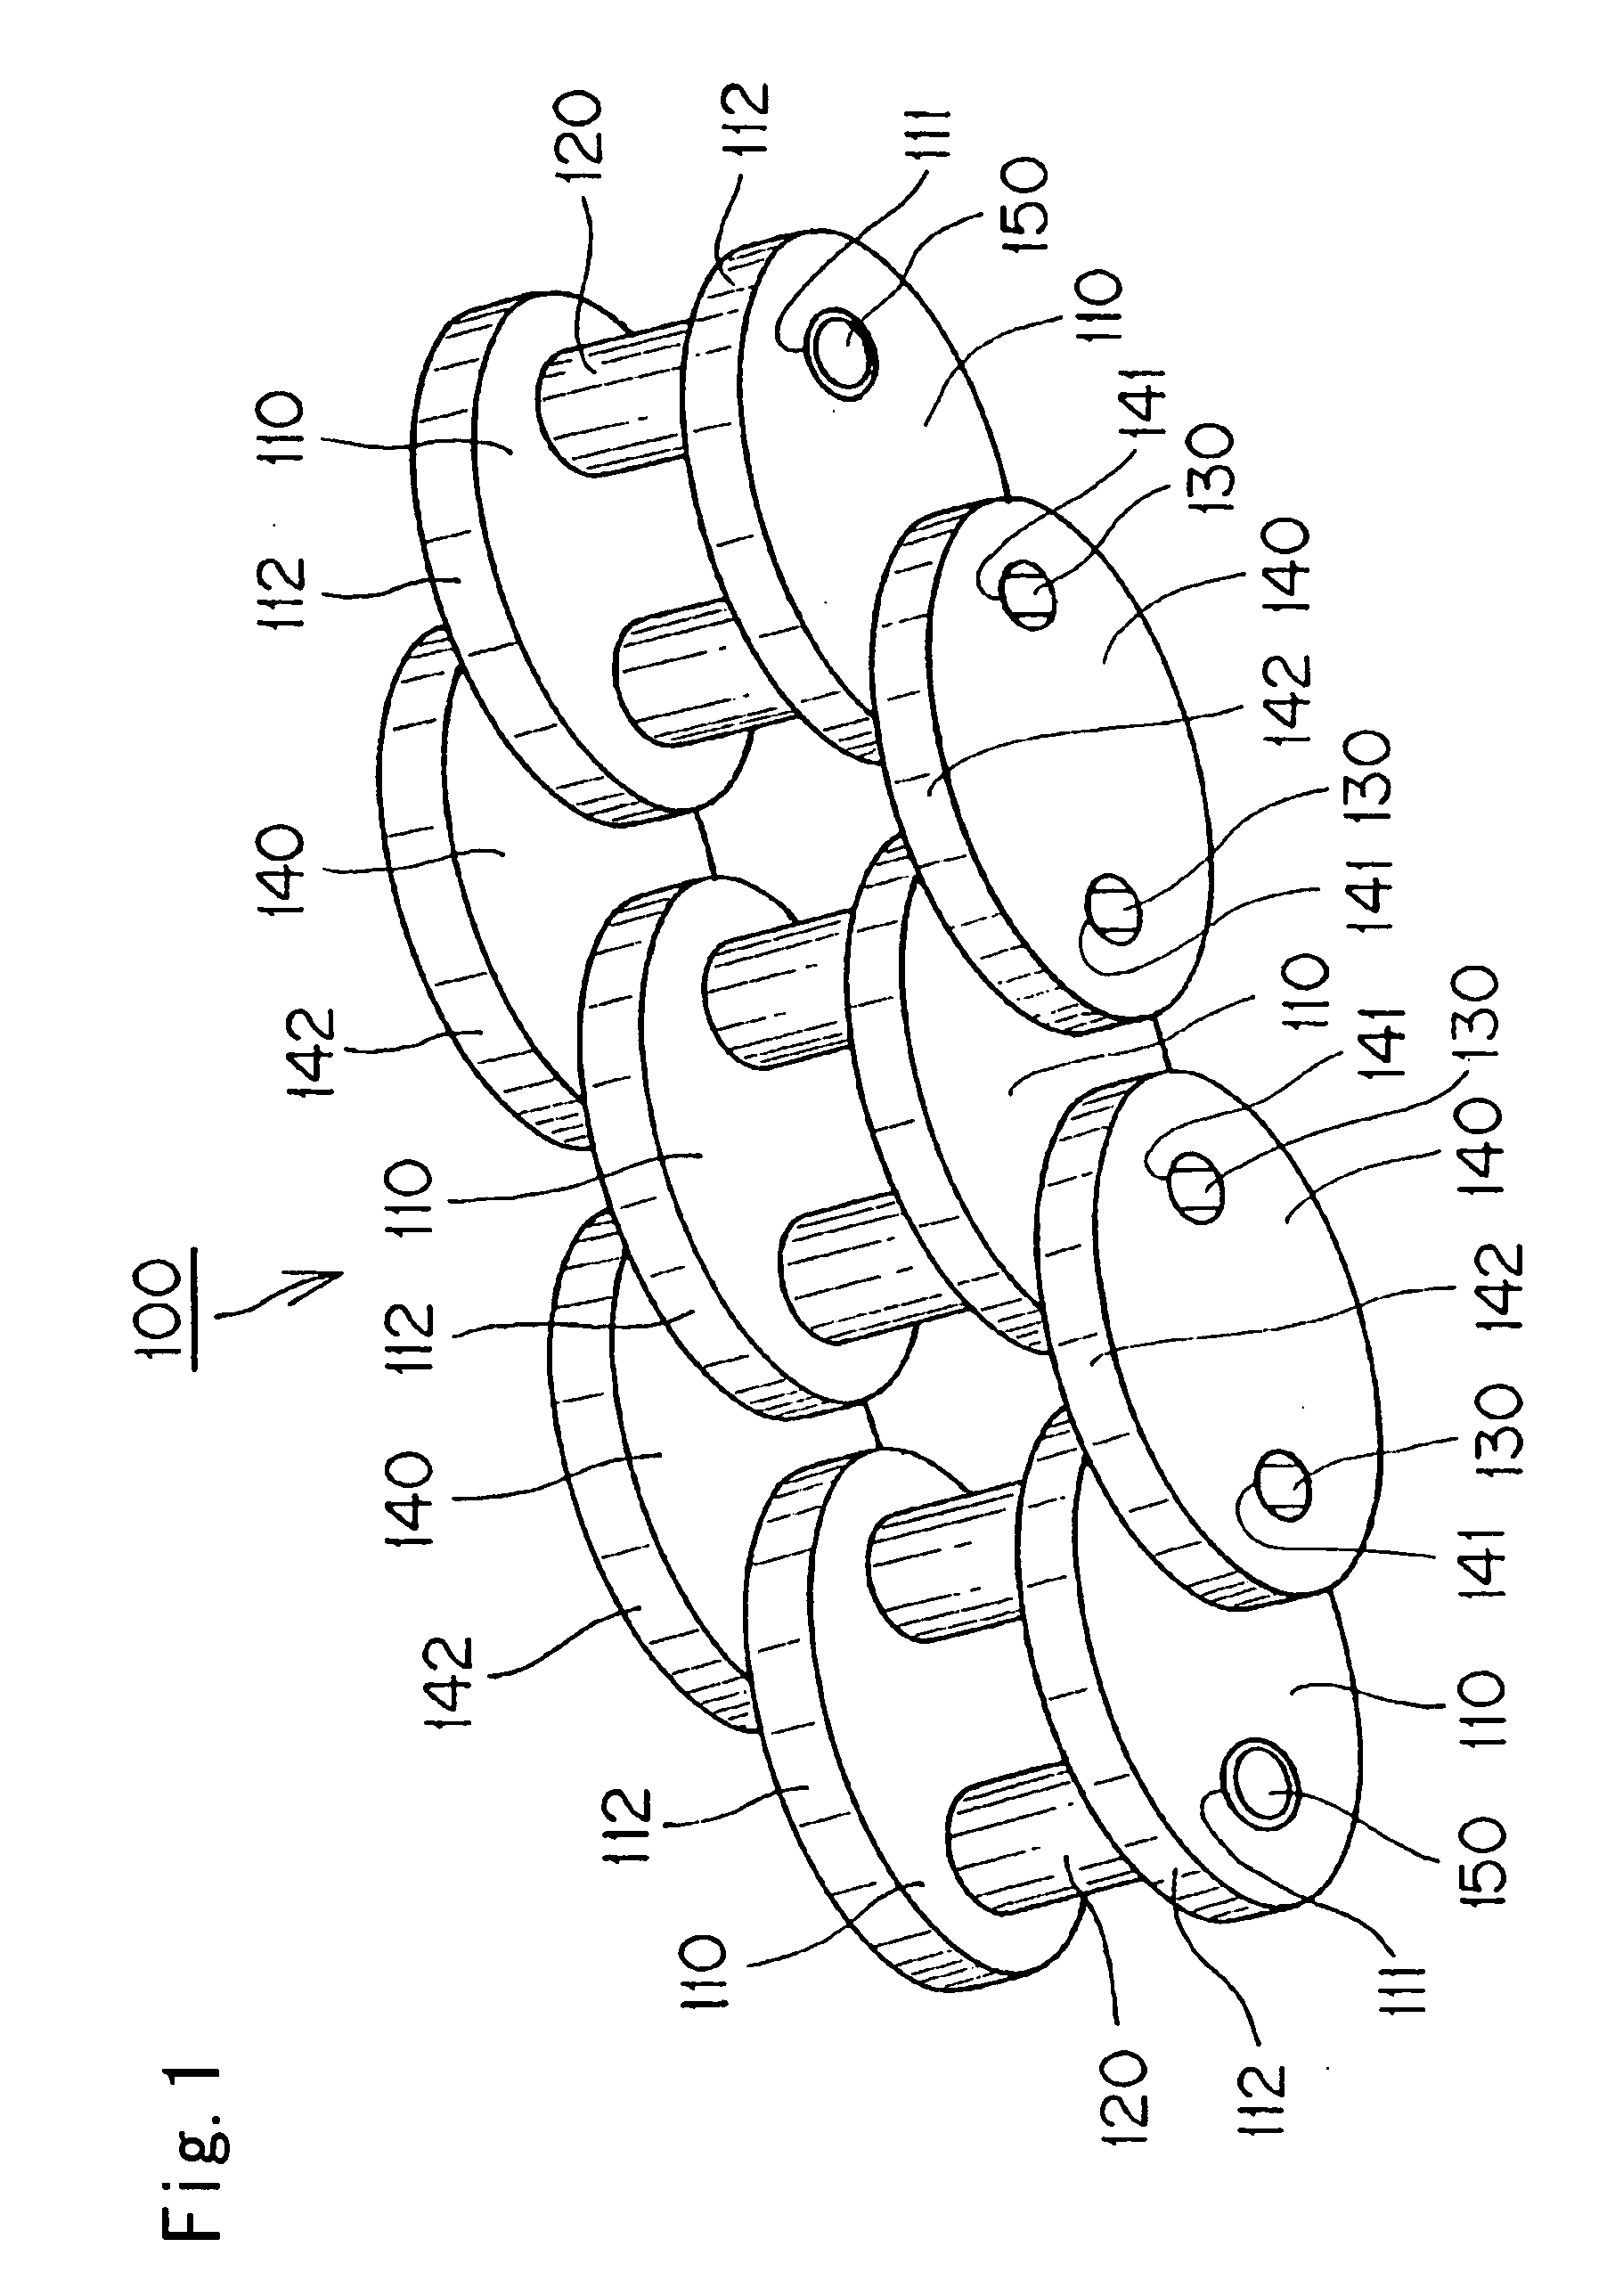 Low friction chain